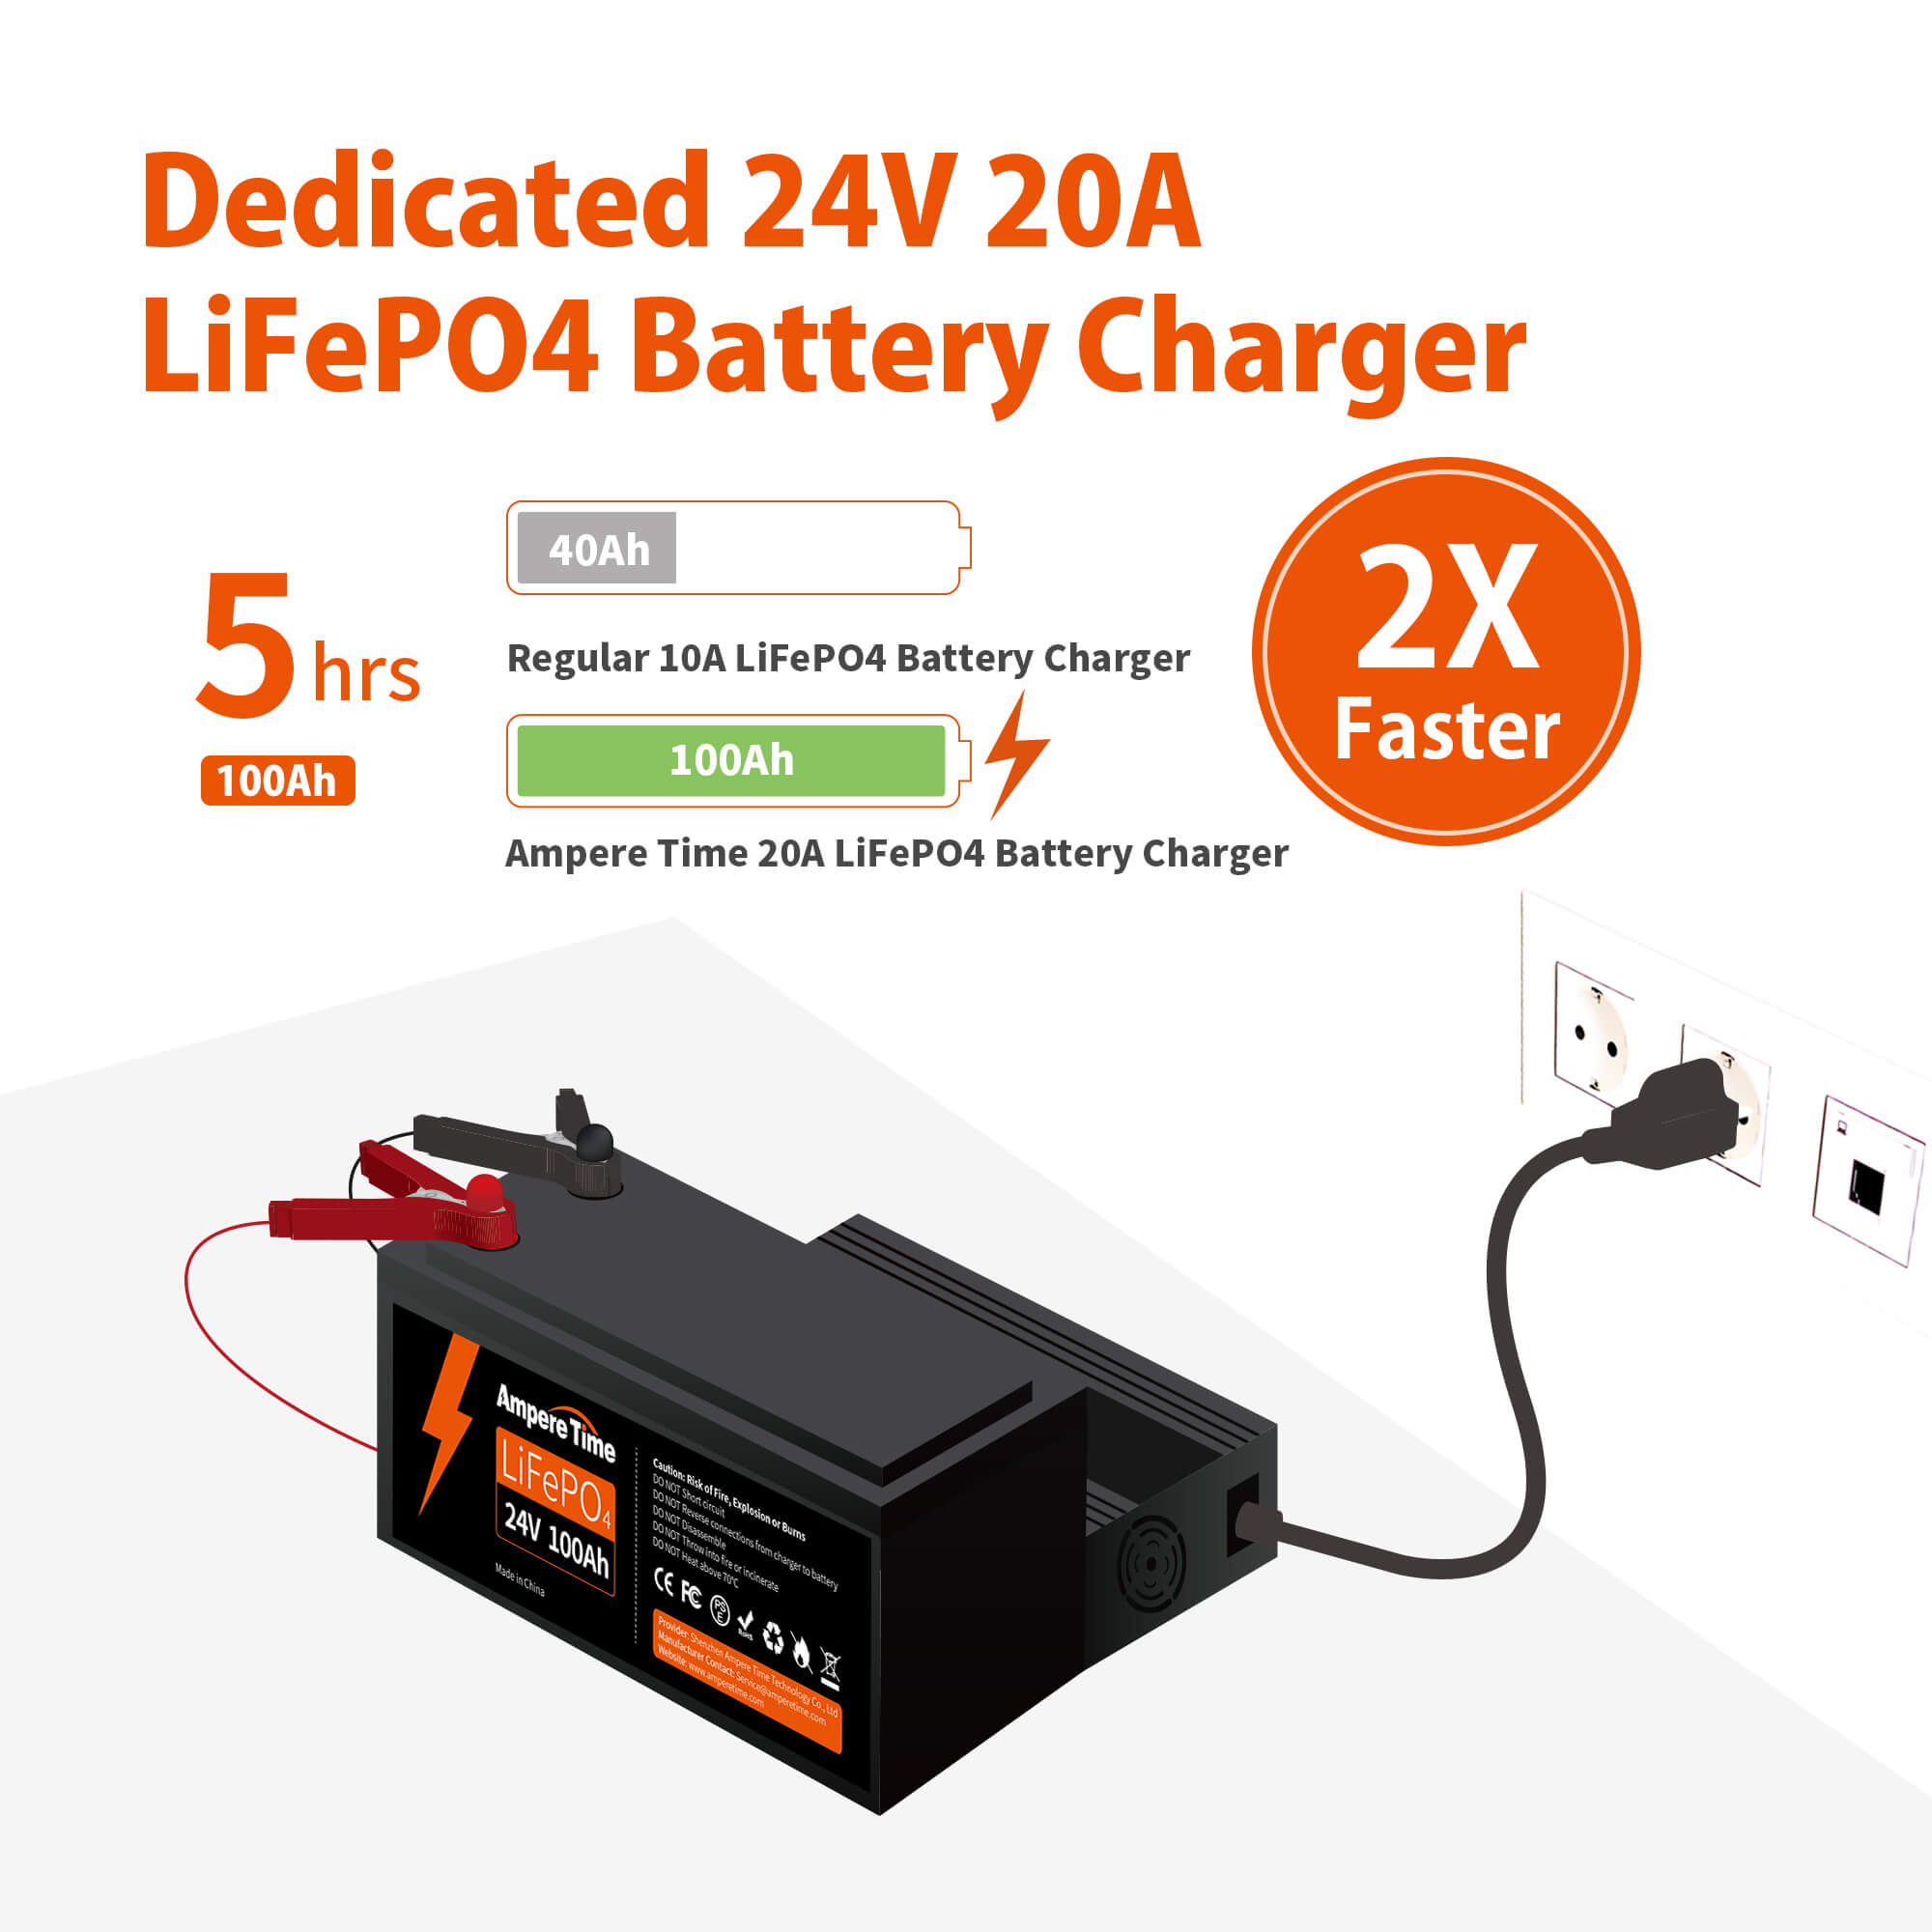 Ampere Time 29.2V 20A LiFePO4 Iron Phosphate Batteries Charger Ampere Time